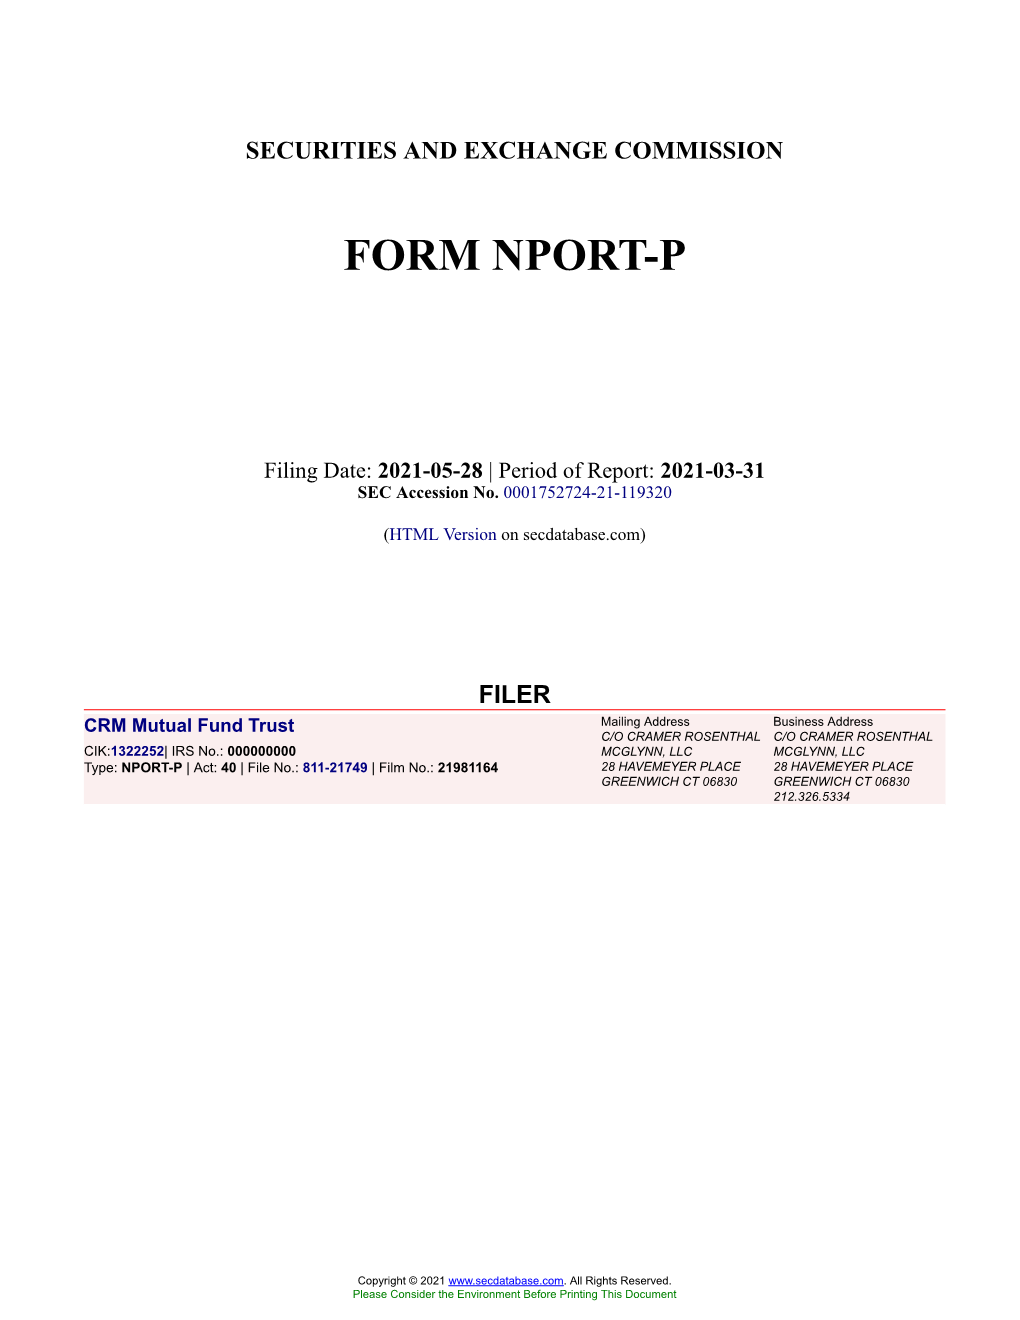 CRM Mutual Fund Trust Form NPORT-P Filed 2021